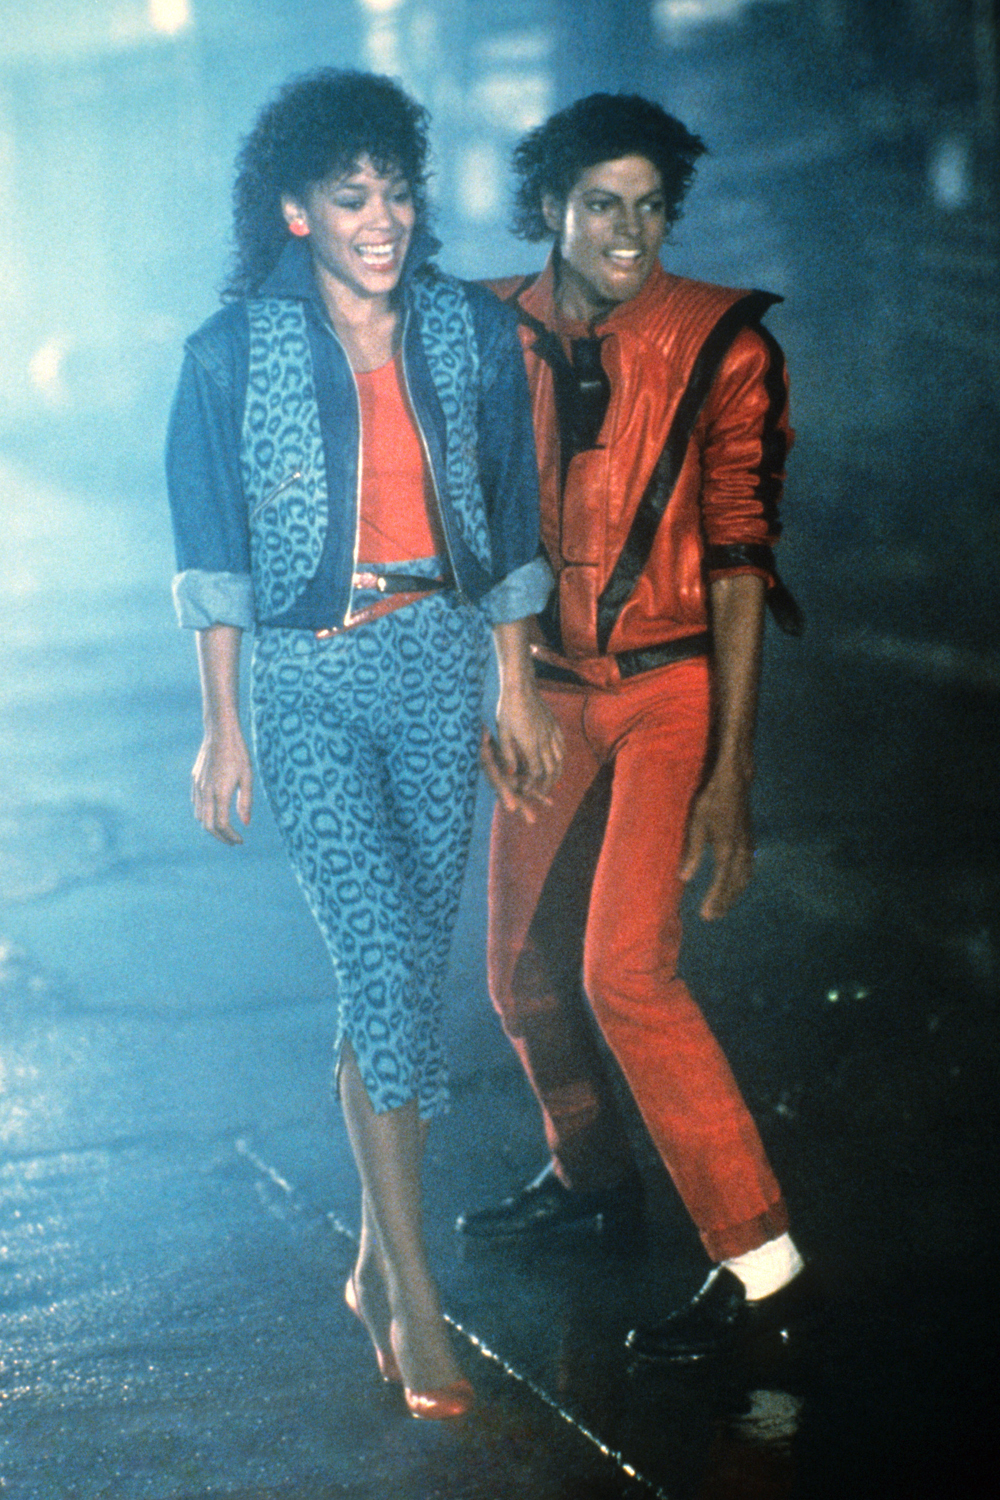 http://www.marieclaire.co.uk/blogs/549946/1980s-fashion-icons-eighties-fashion-80s-style-moments.html